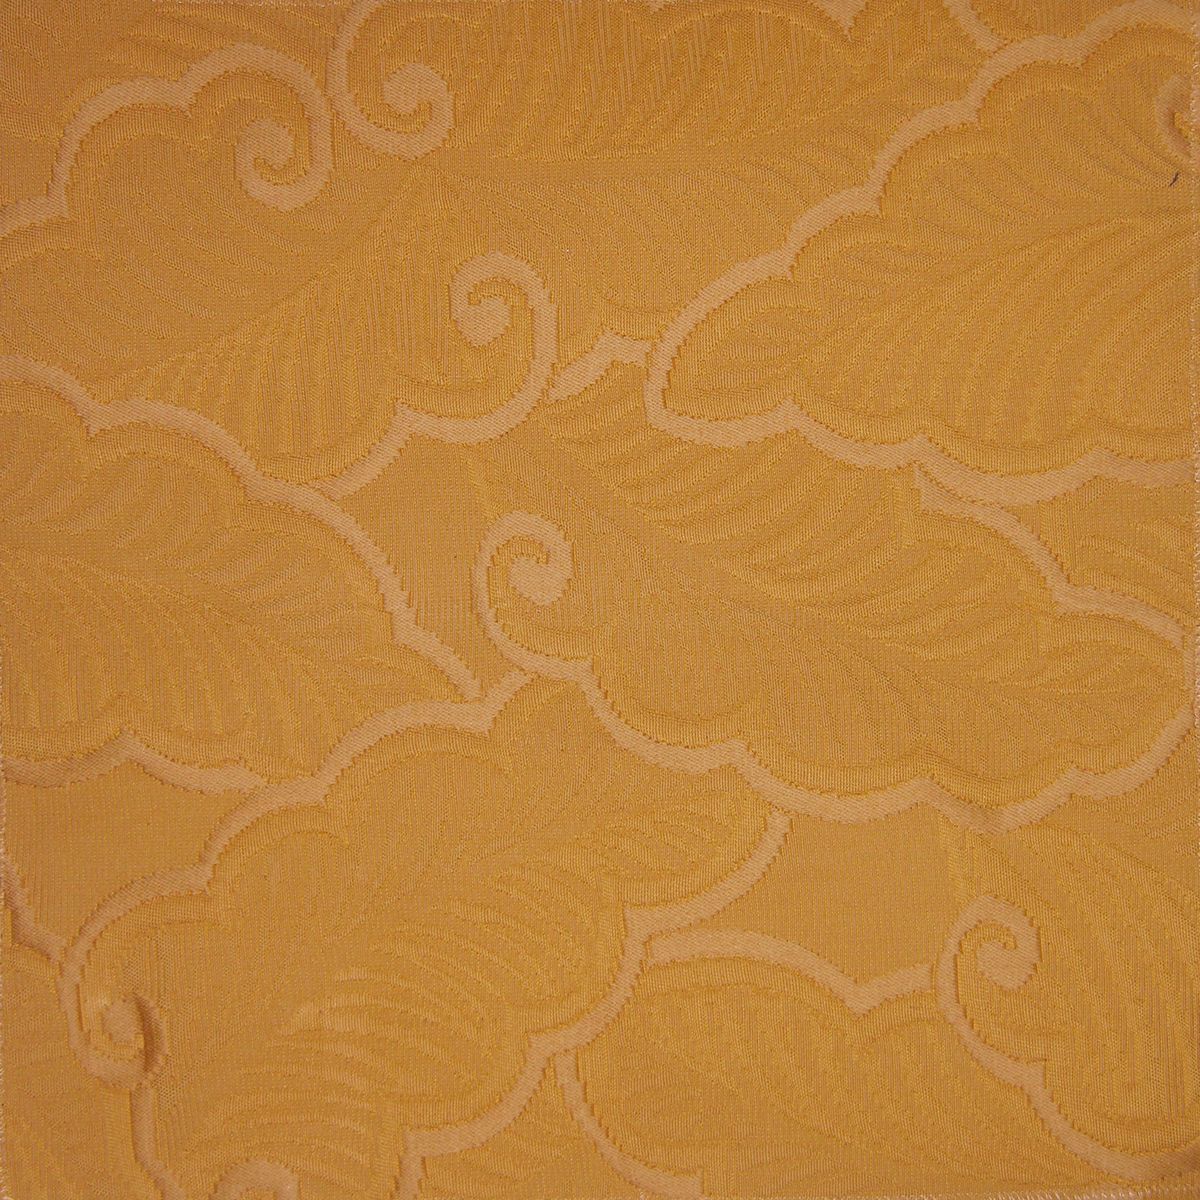 Copacabana fabric in gold color - pattern number PB 00021917 - by Scalamandre in the Old World Weavers collection